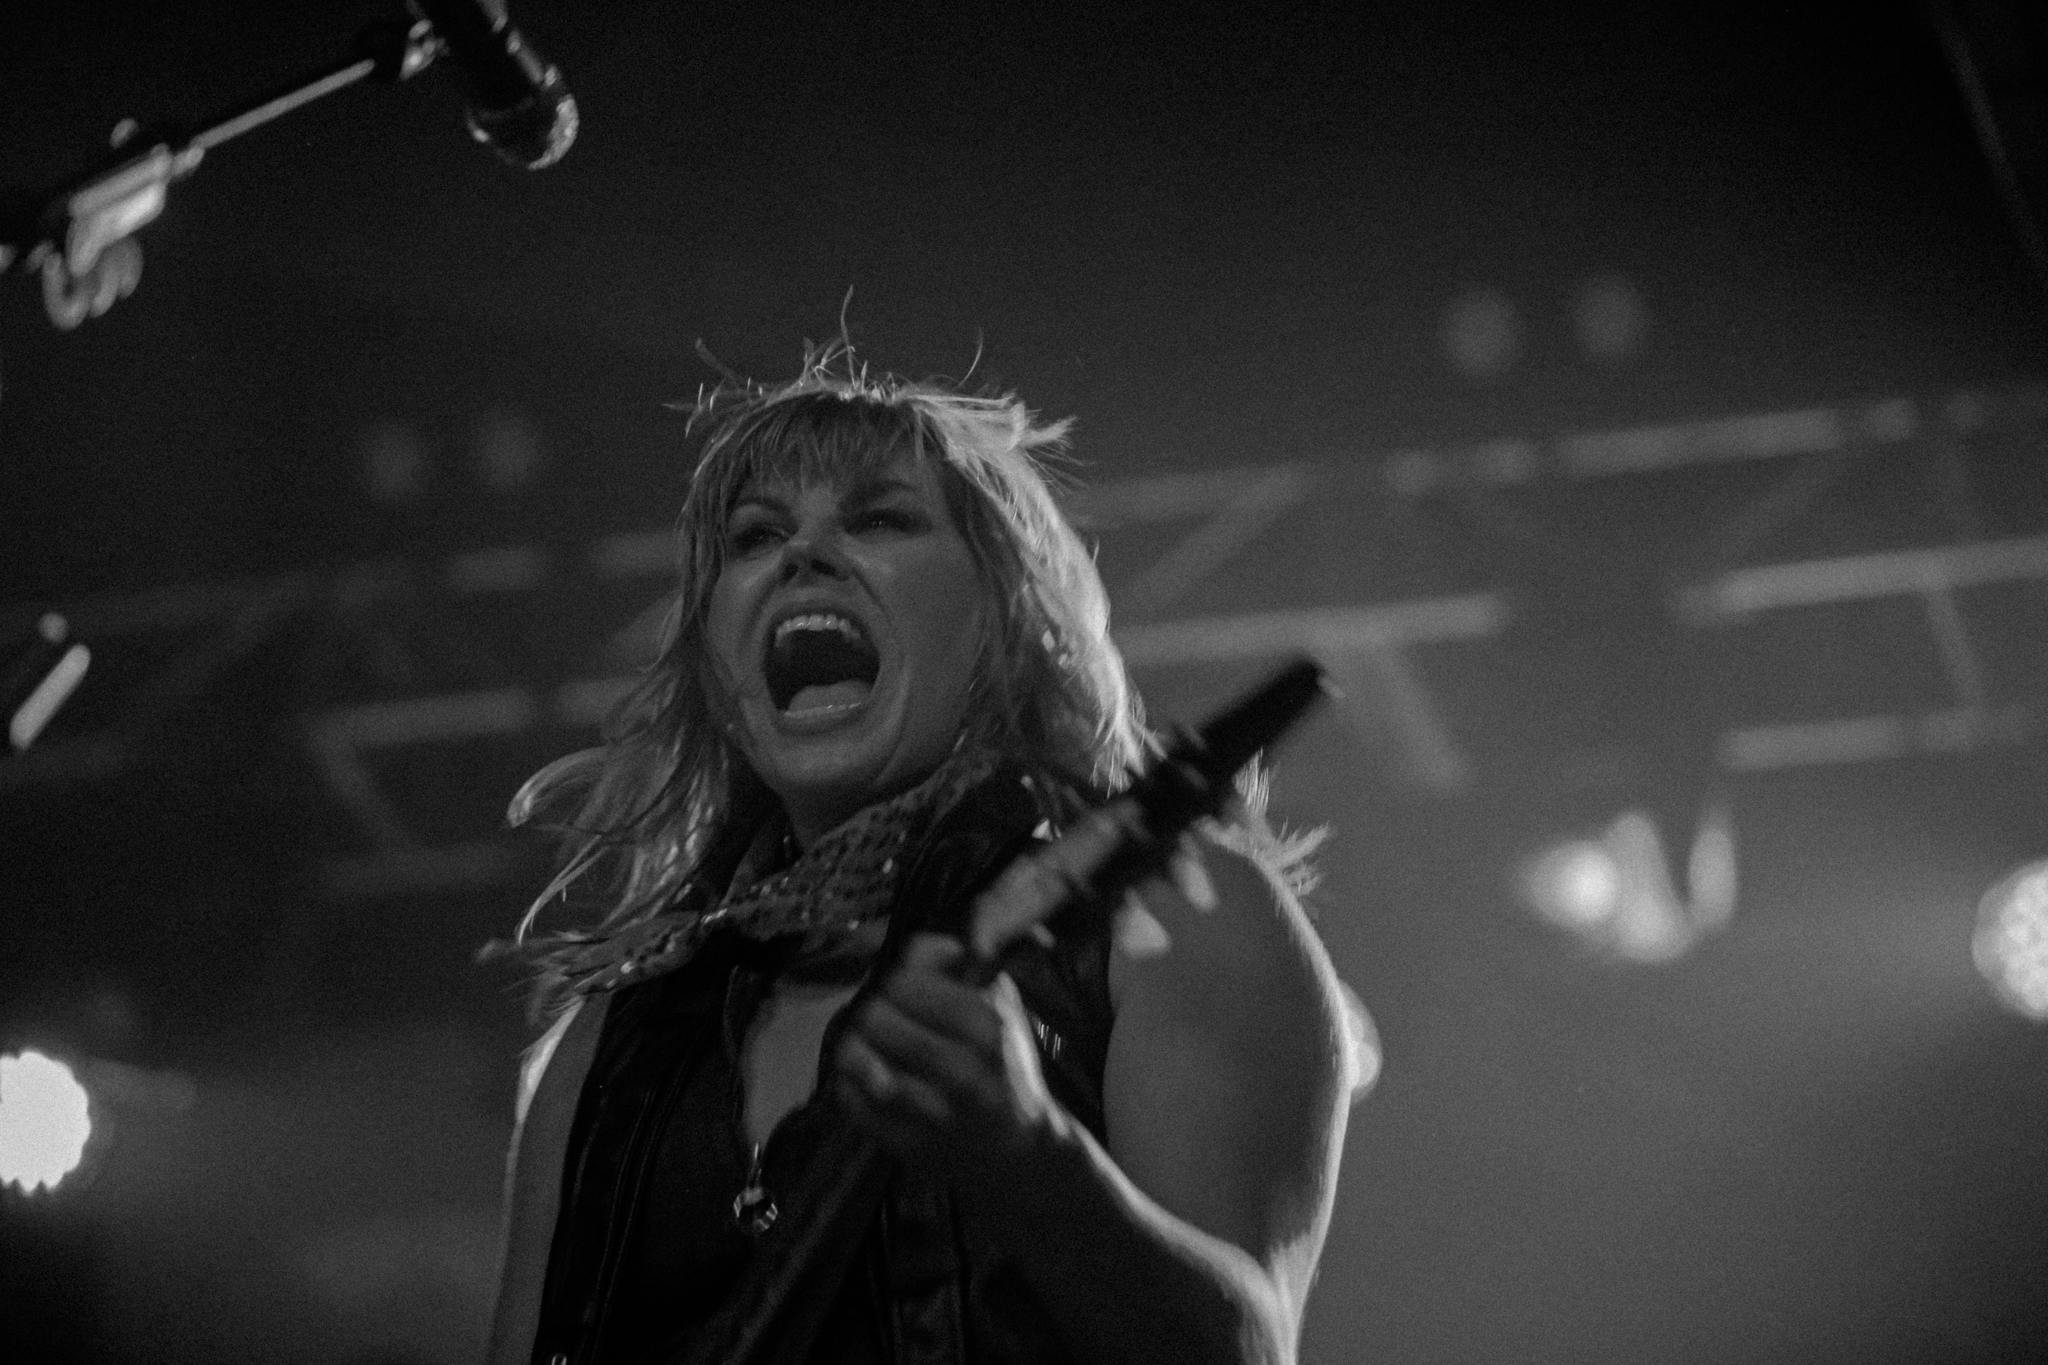 Grace Potter is a female musical artist that tours in America playing rock n roll.  